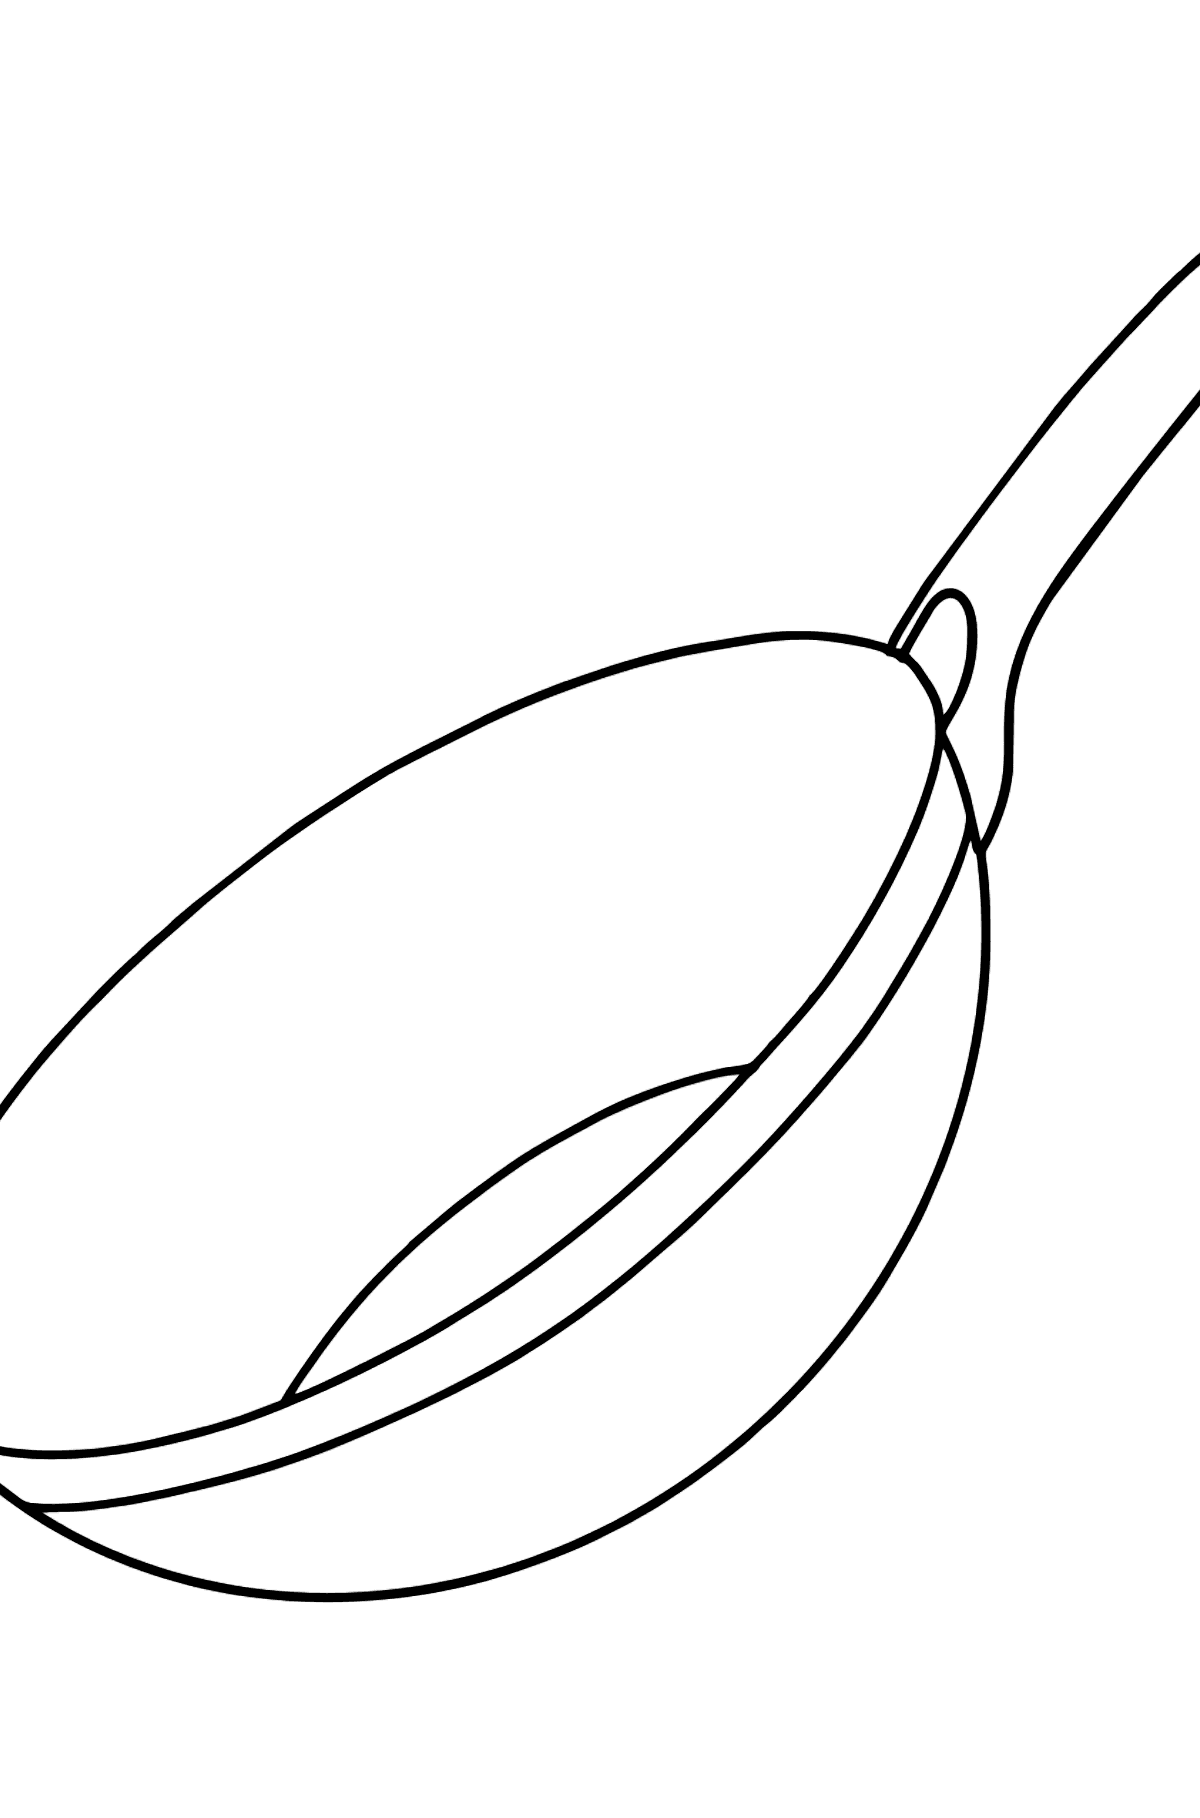 Wok pan coloring page - Coloring Pages for Kids